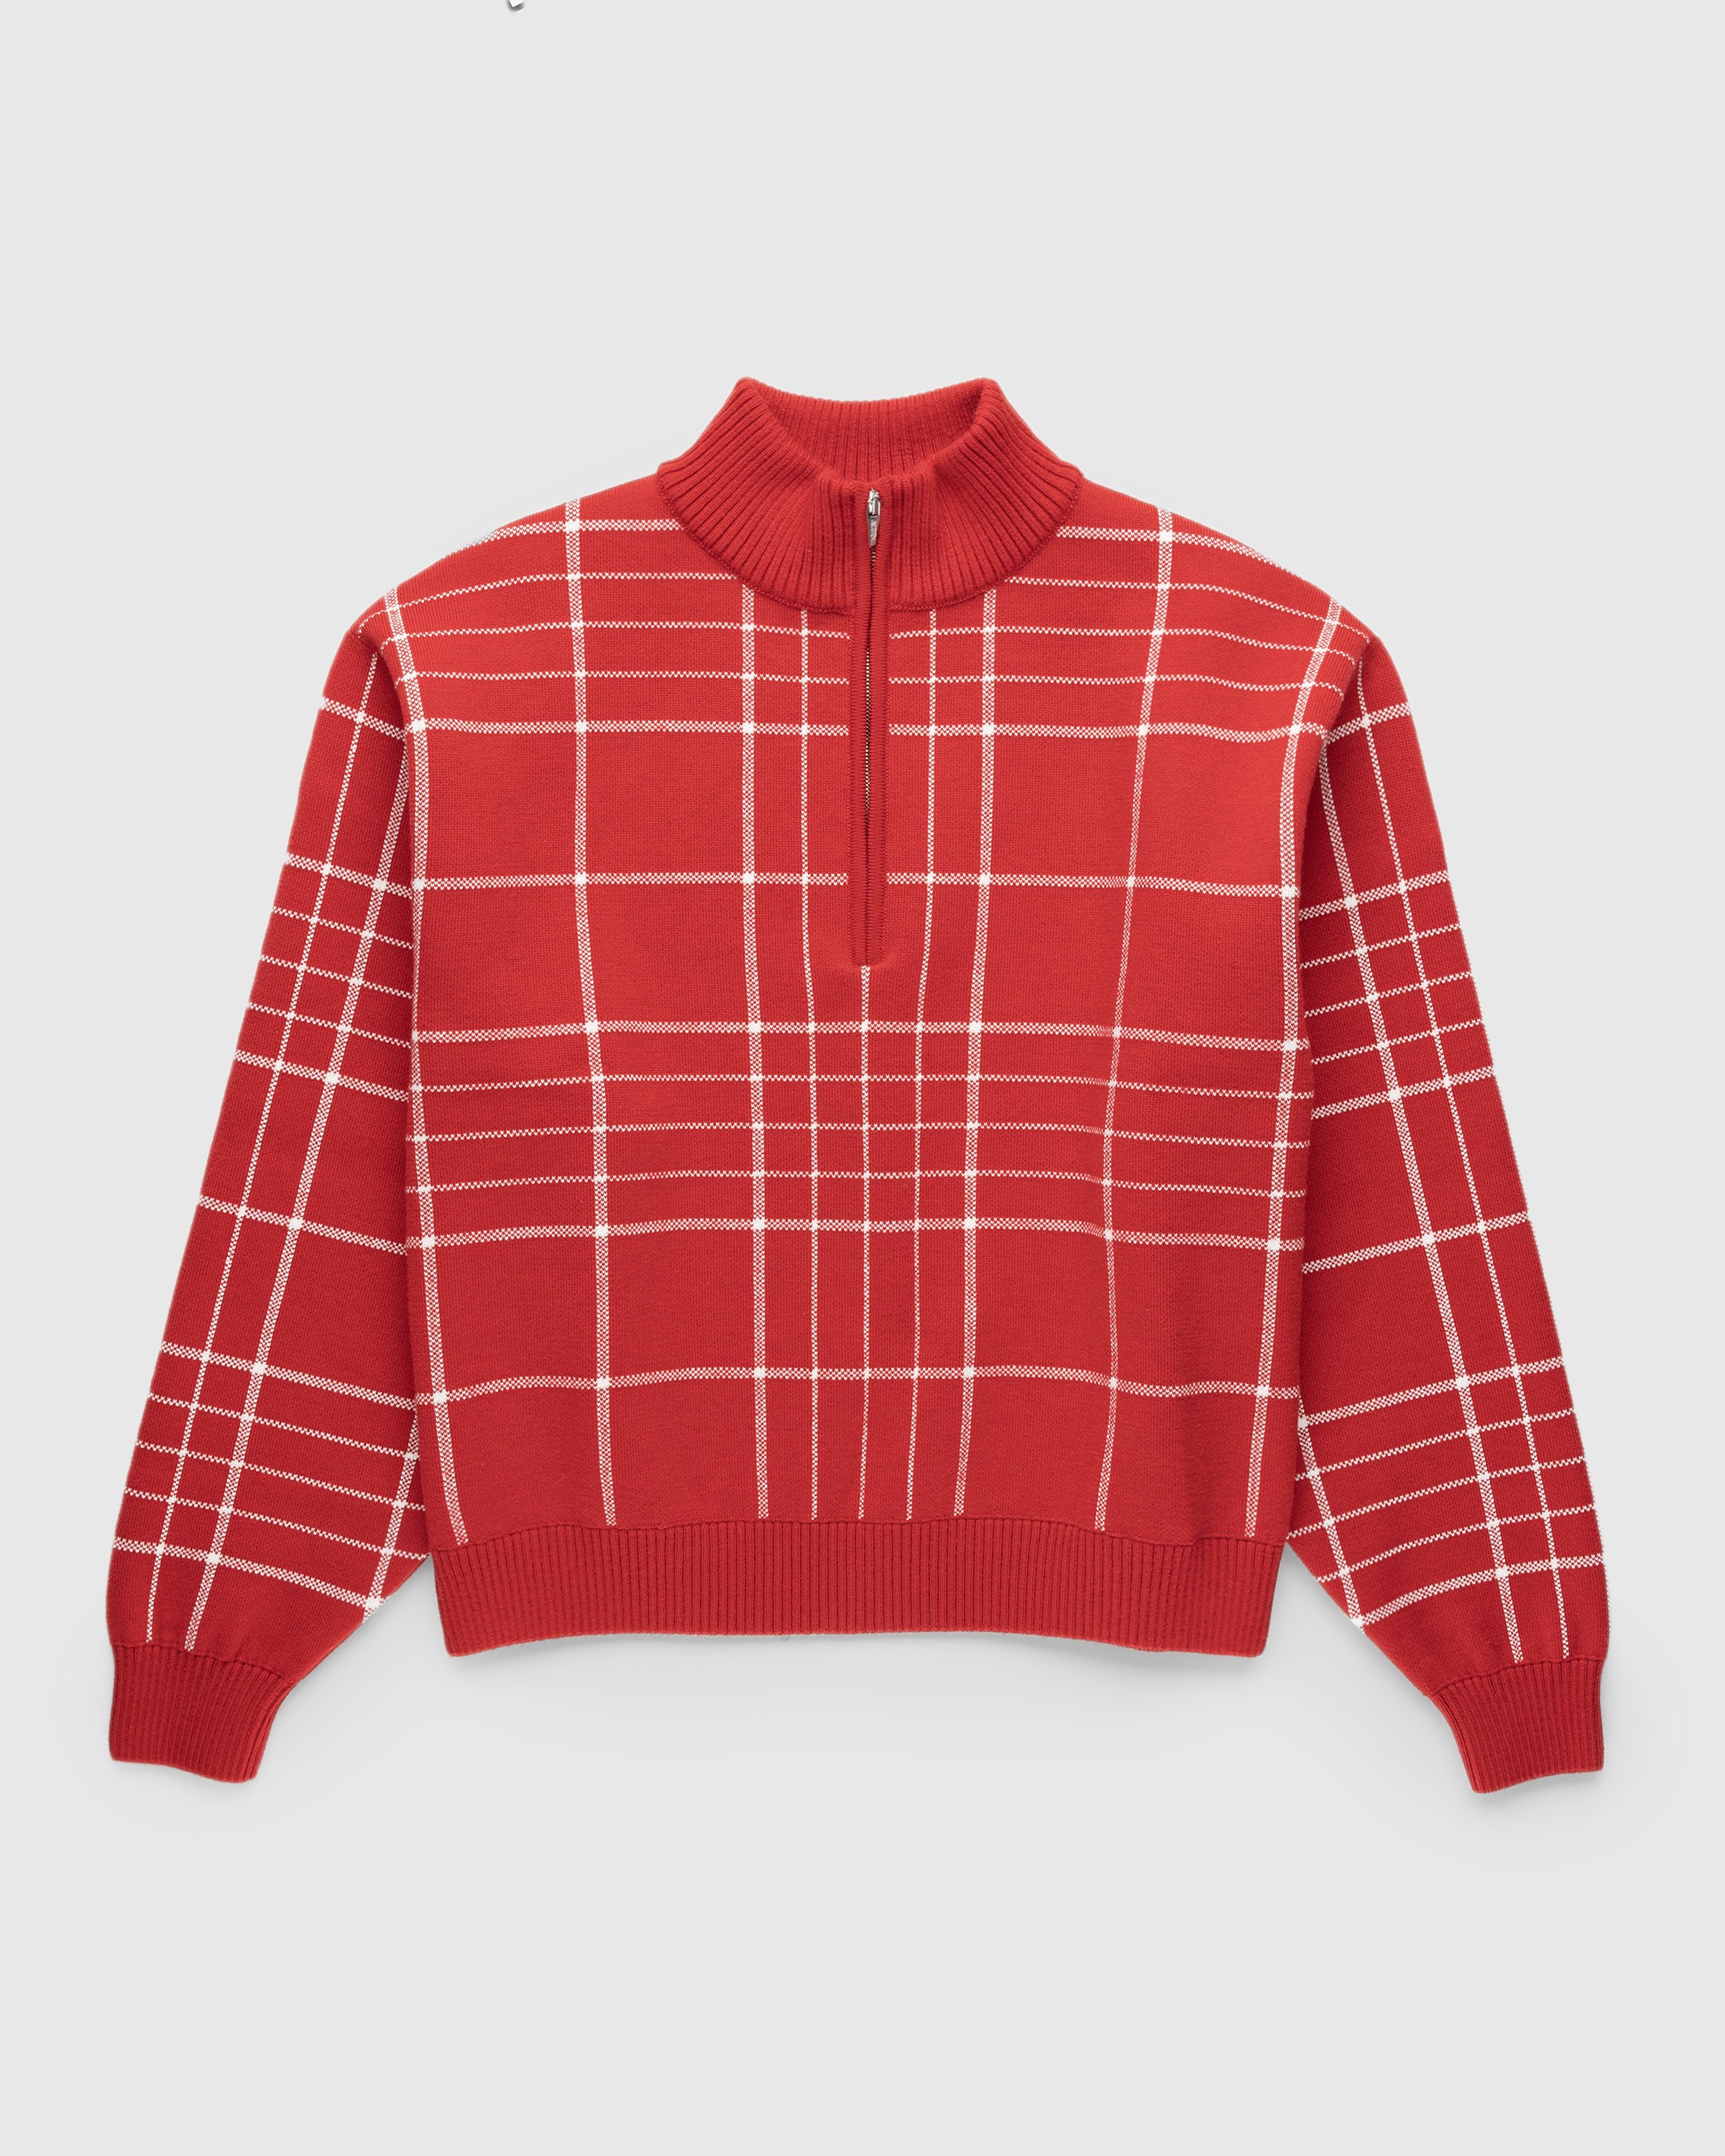 JACQUEMUS - La Maille Carro Multi-Red - Clothing - Red - Image 1